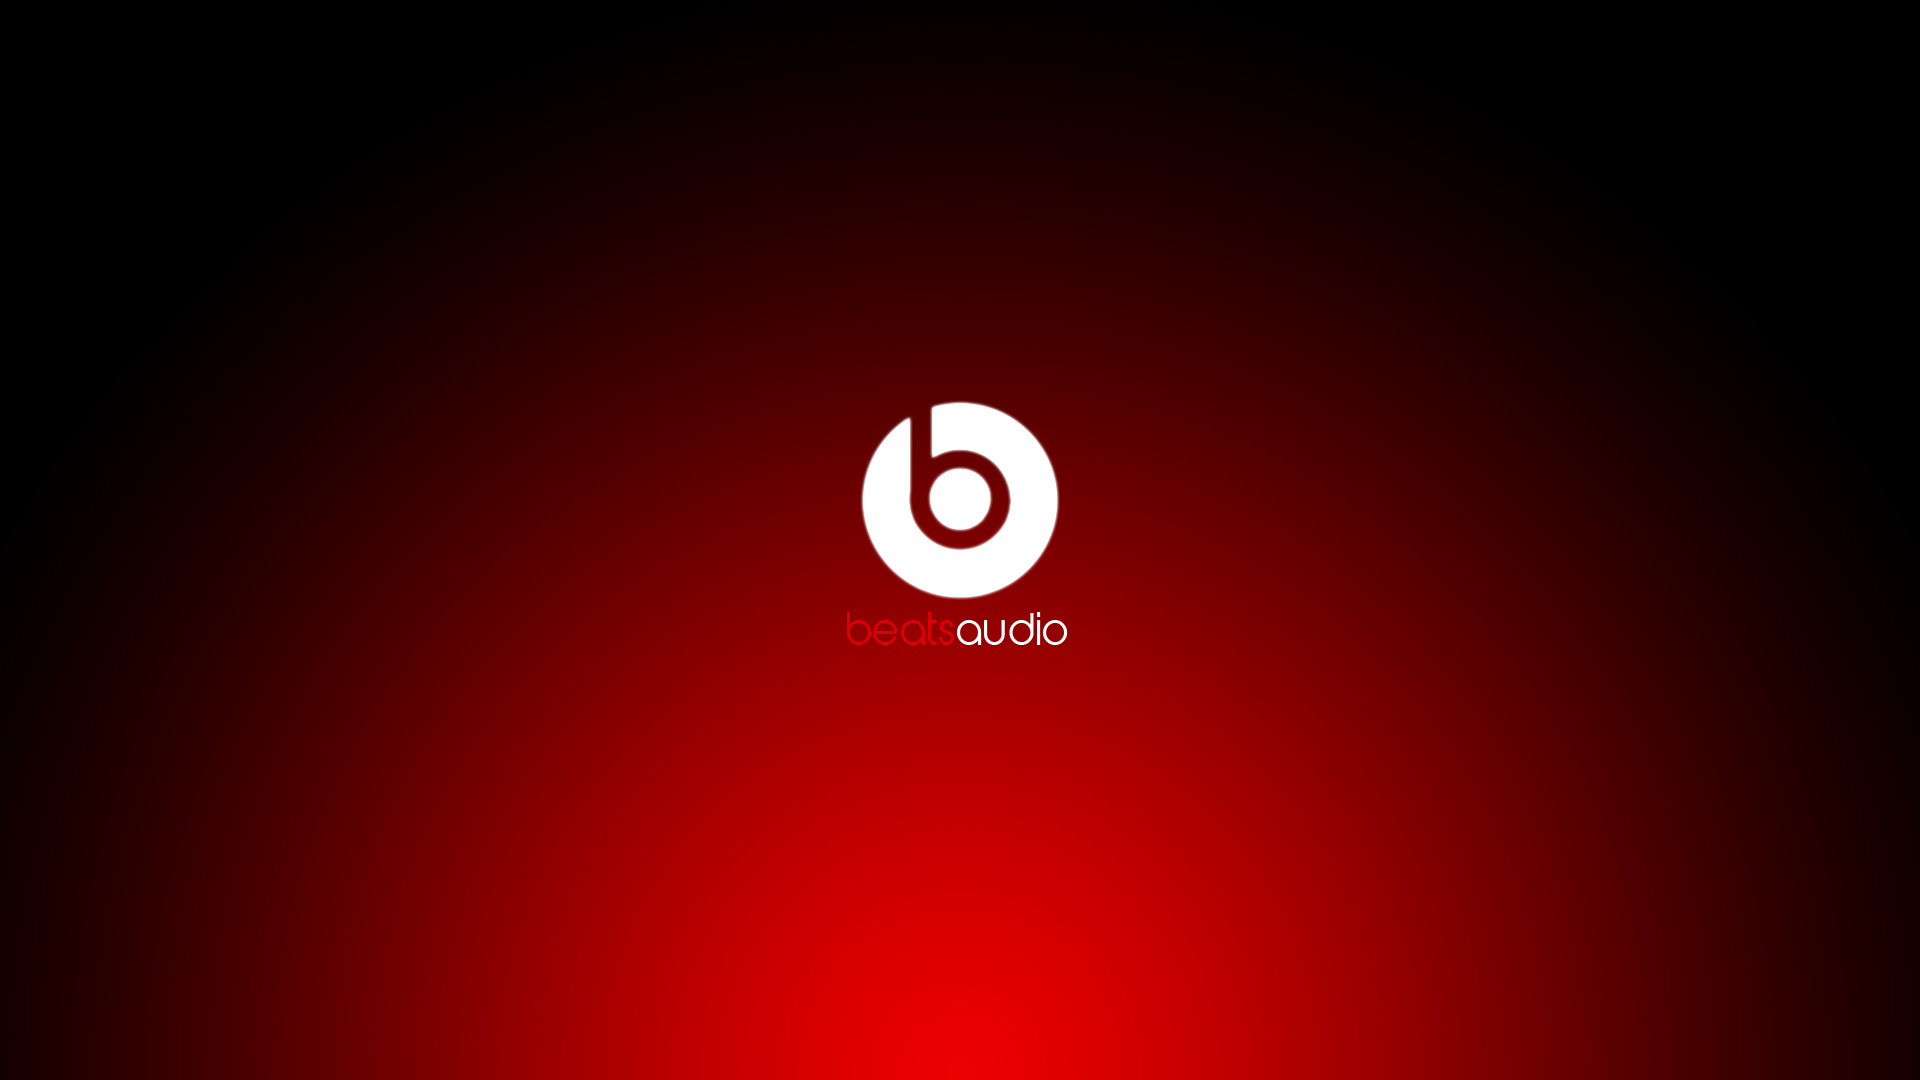 1920x1080 ... Wallpapers & Icons | NotebookReview HP Beats Audio wallpaper Nero  commercial abstract by CHARLIEGOD on .